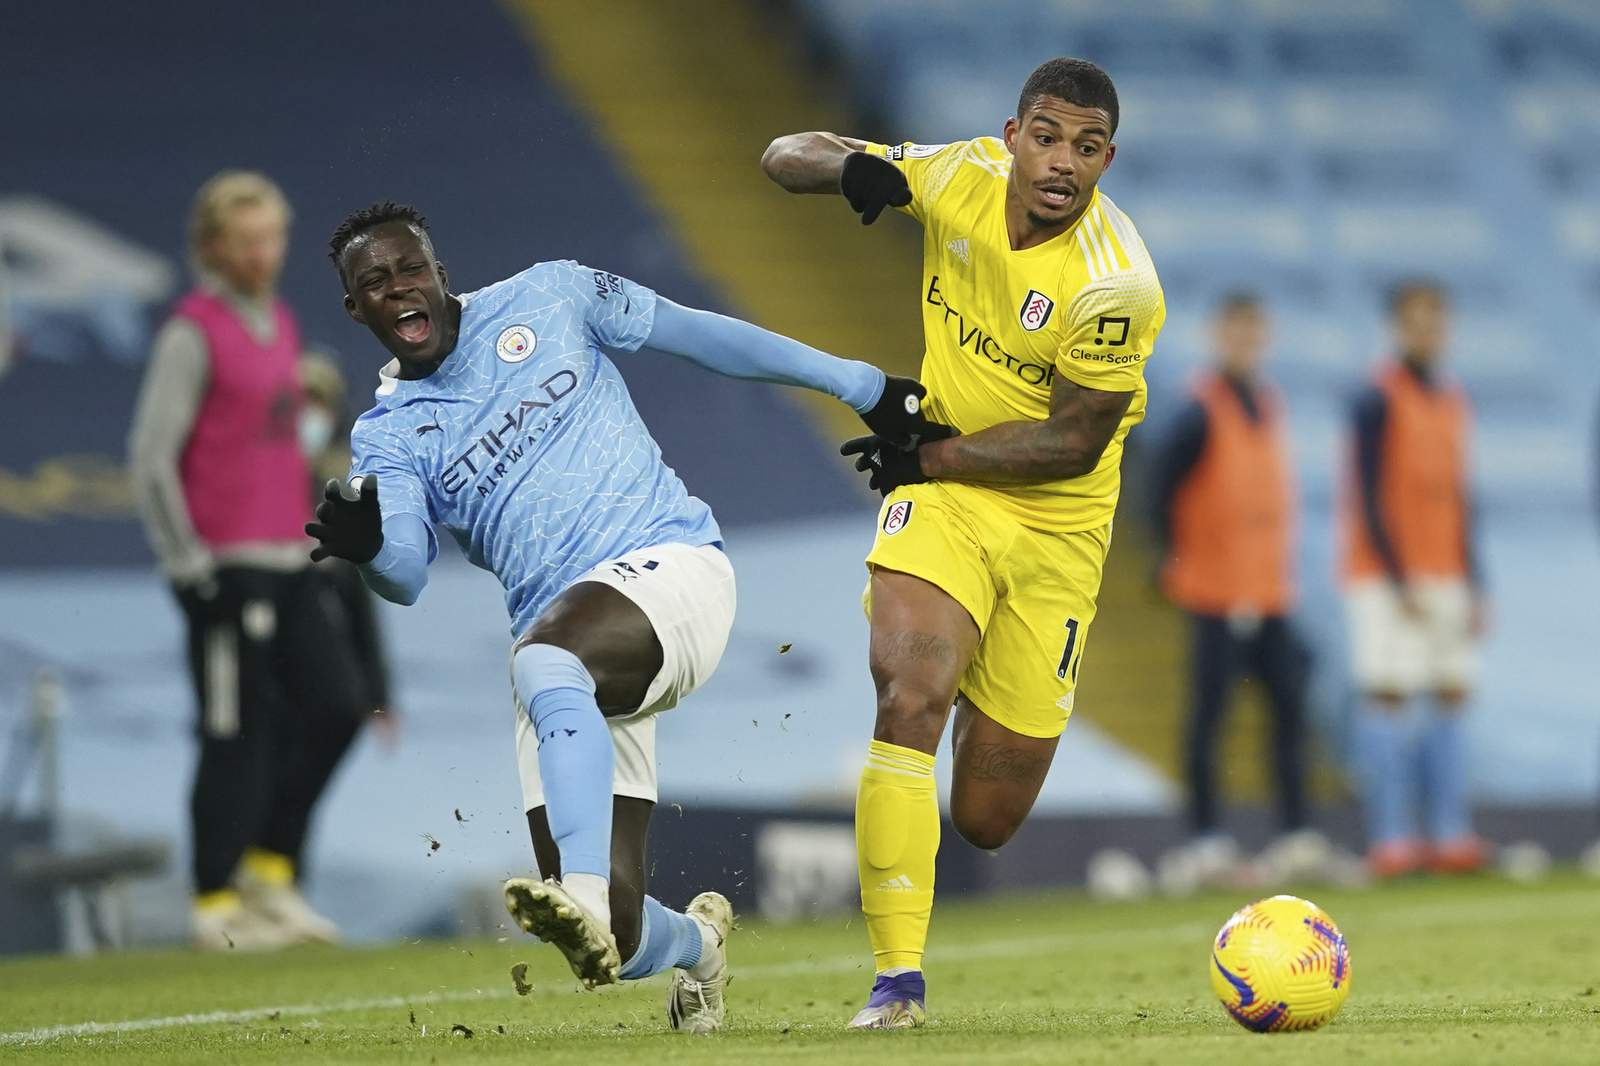 Man City's Mendy the latest EPL player to breach virus rules